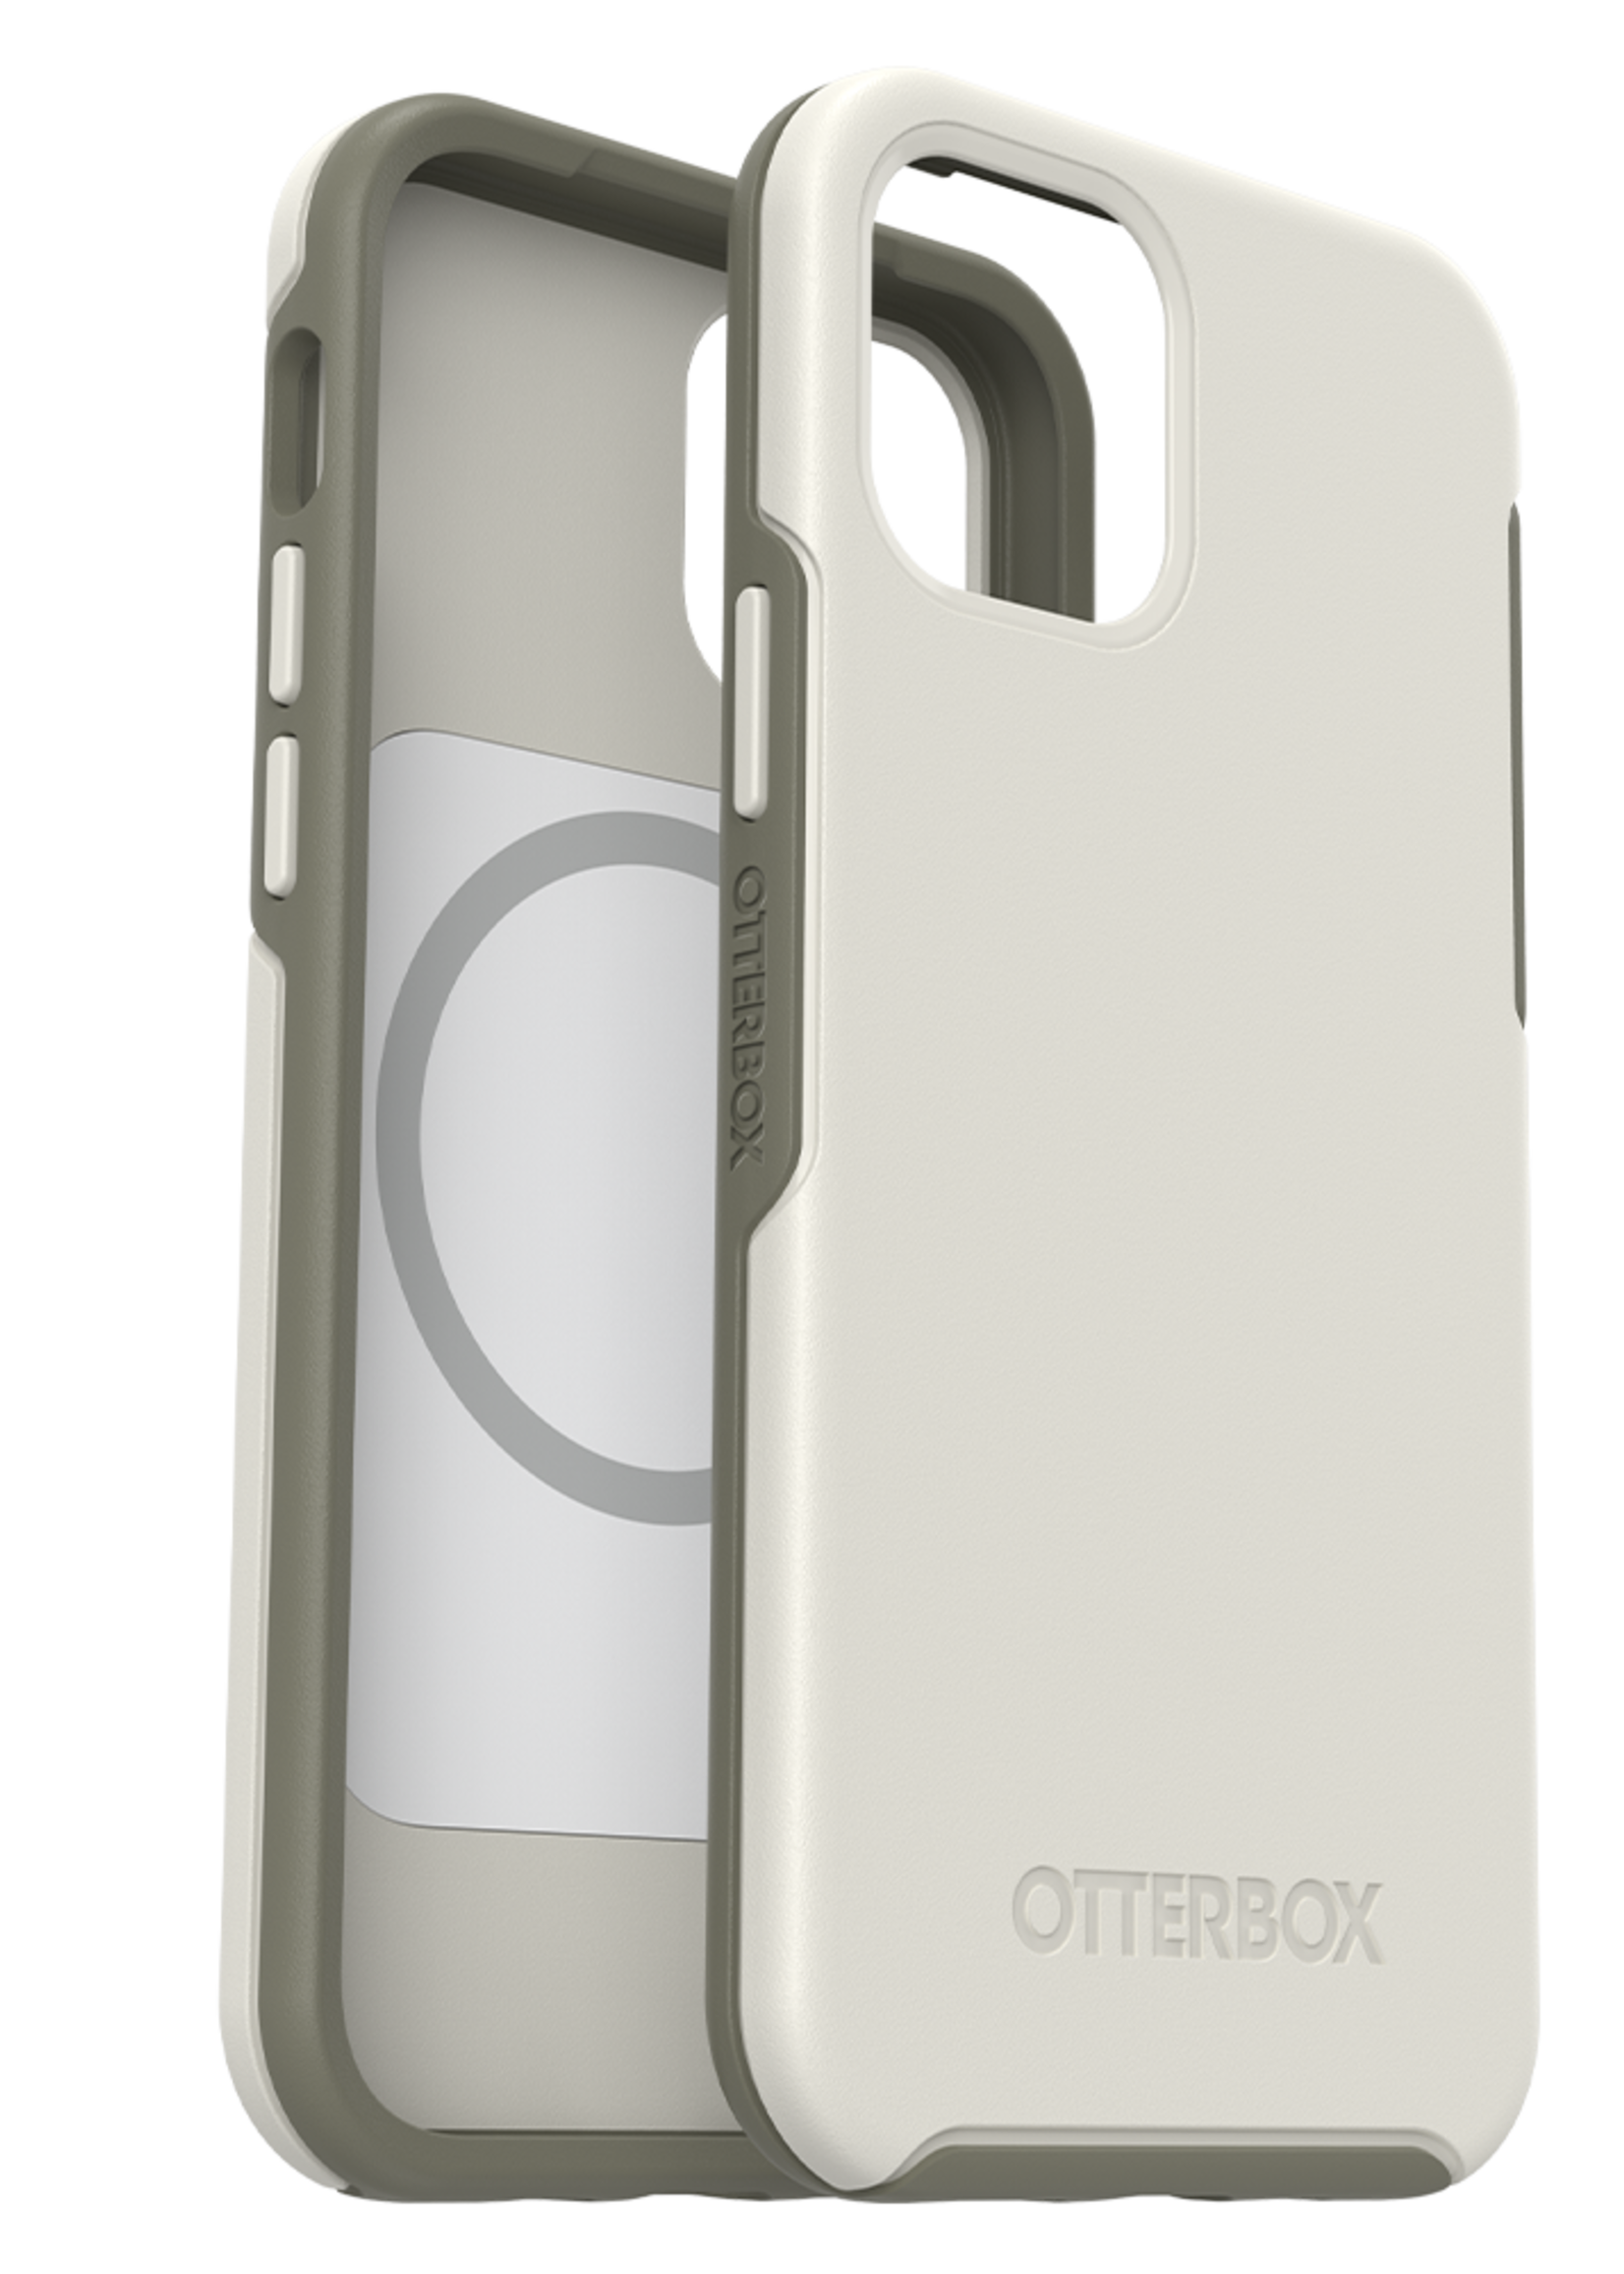 Otterbox OtterBox - Symmetry Plus Case for Apple iPhone 12 / 12 Pro - Spring Snow